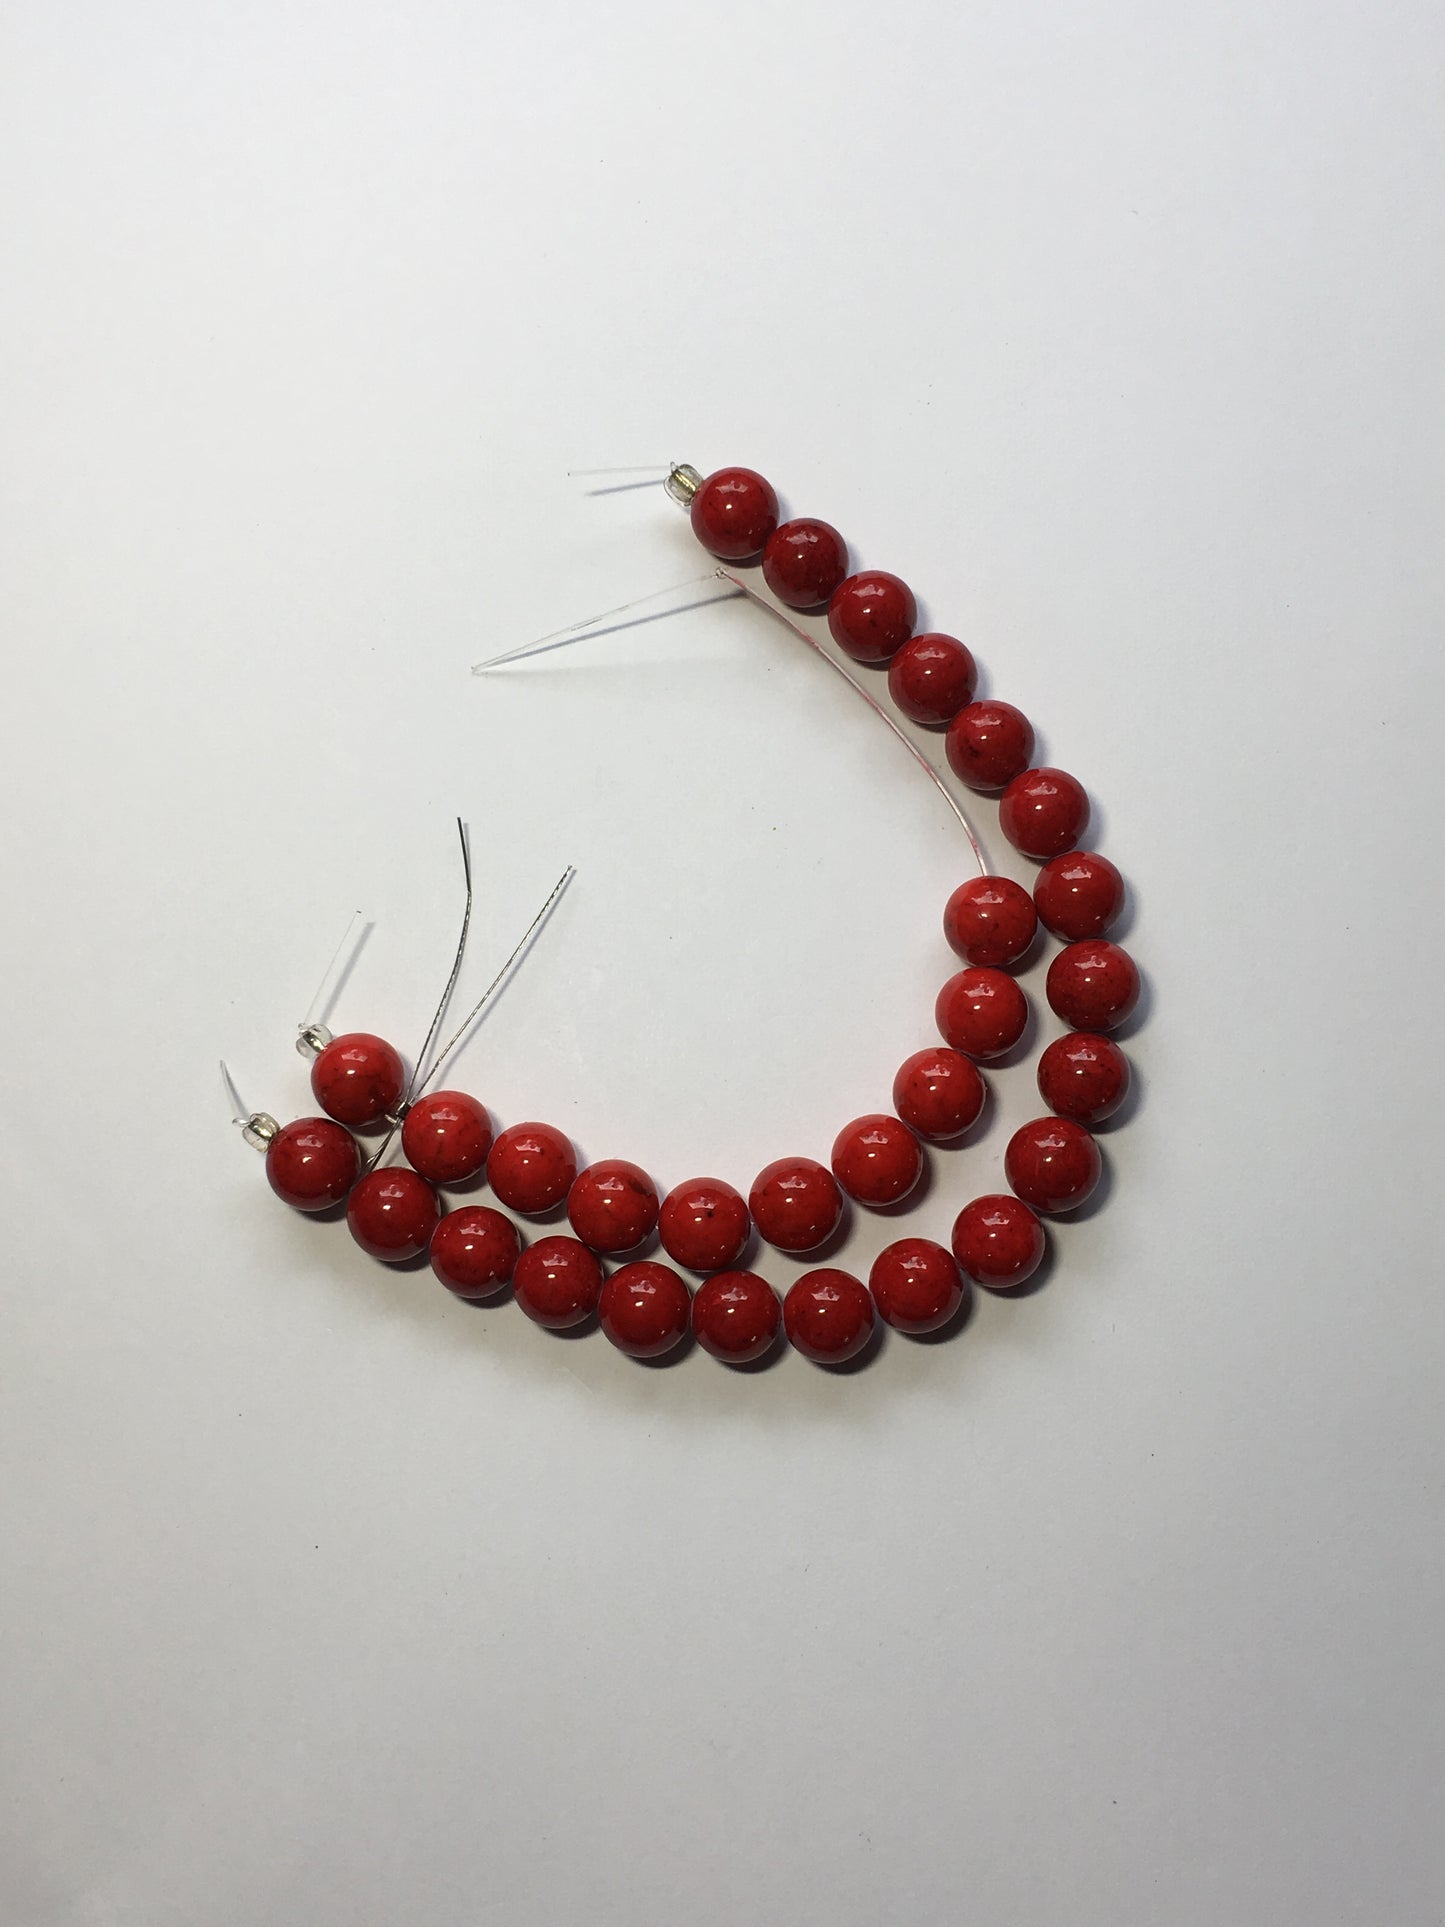 Blue Moon Natural Elegance Red Stone Round Beads, 10 mm - 19 Beads